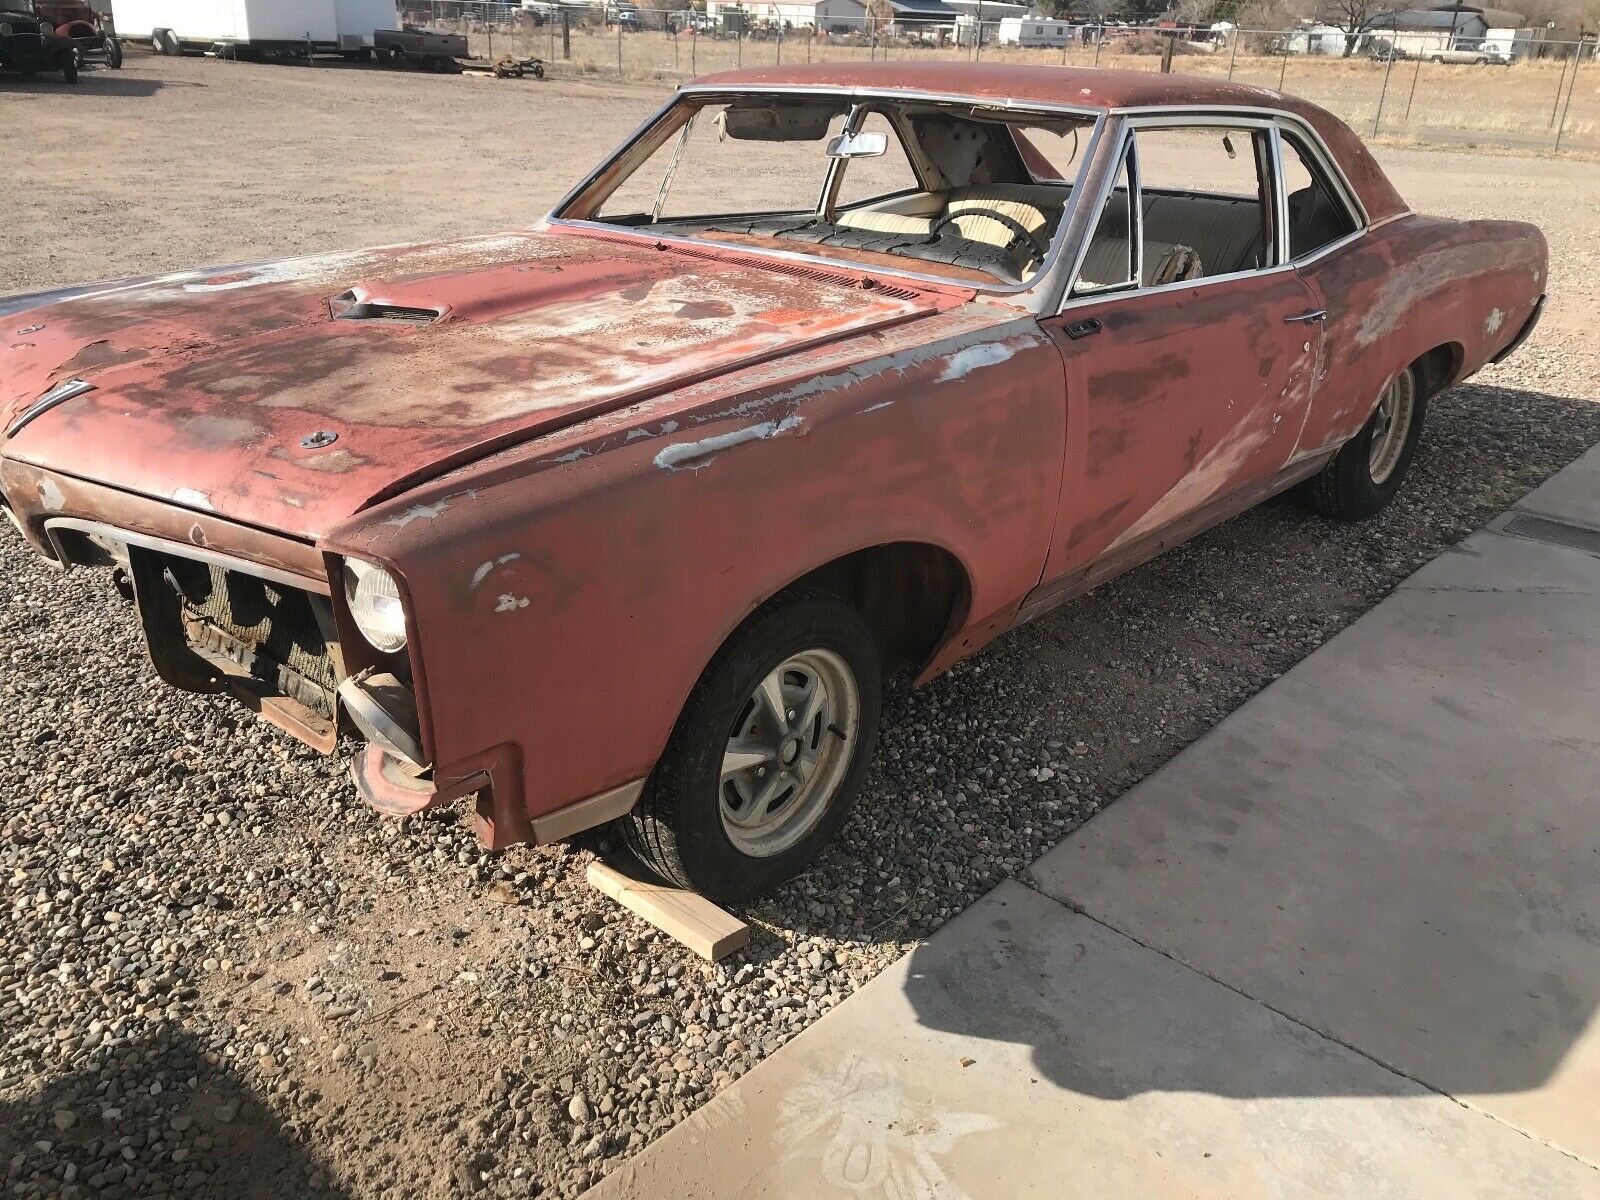 1967 Pontiac GTO Sitting for Years Survived the Vandals, Engine Turns Over - autoevolution